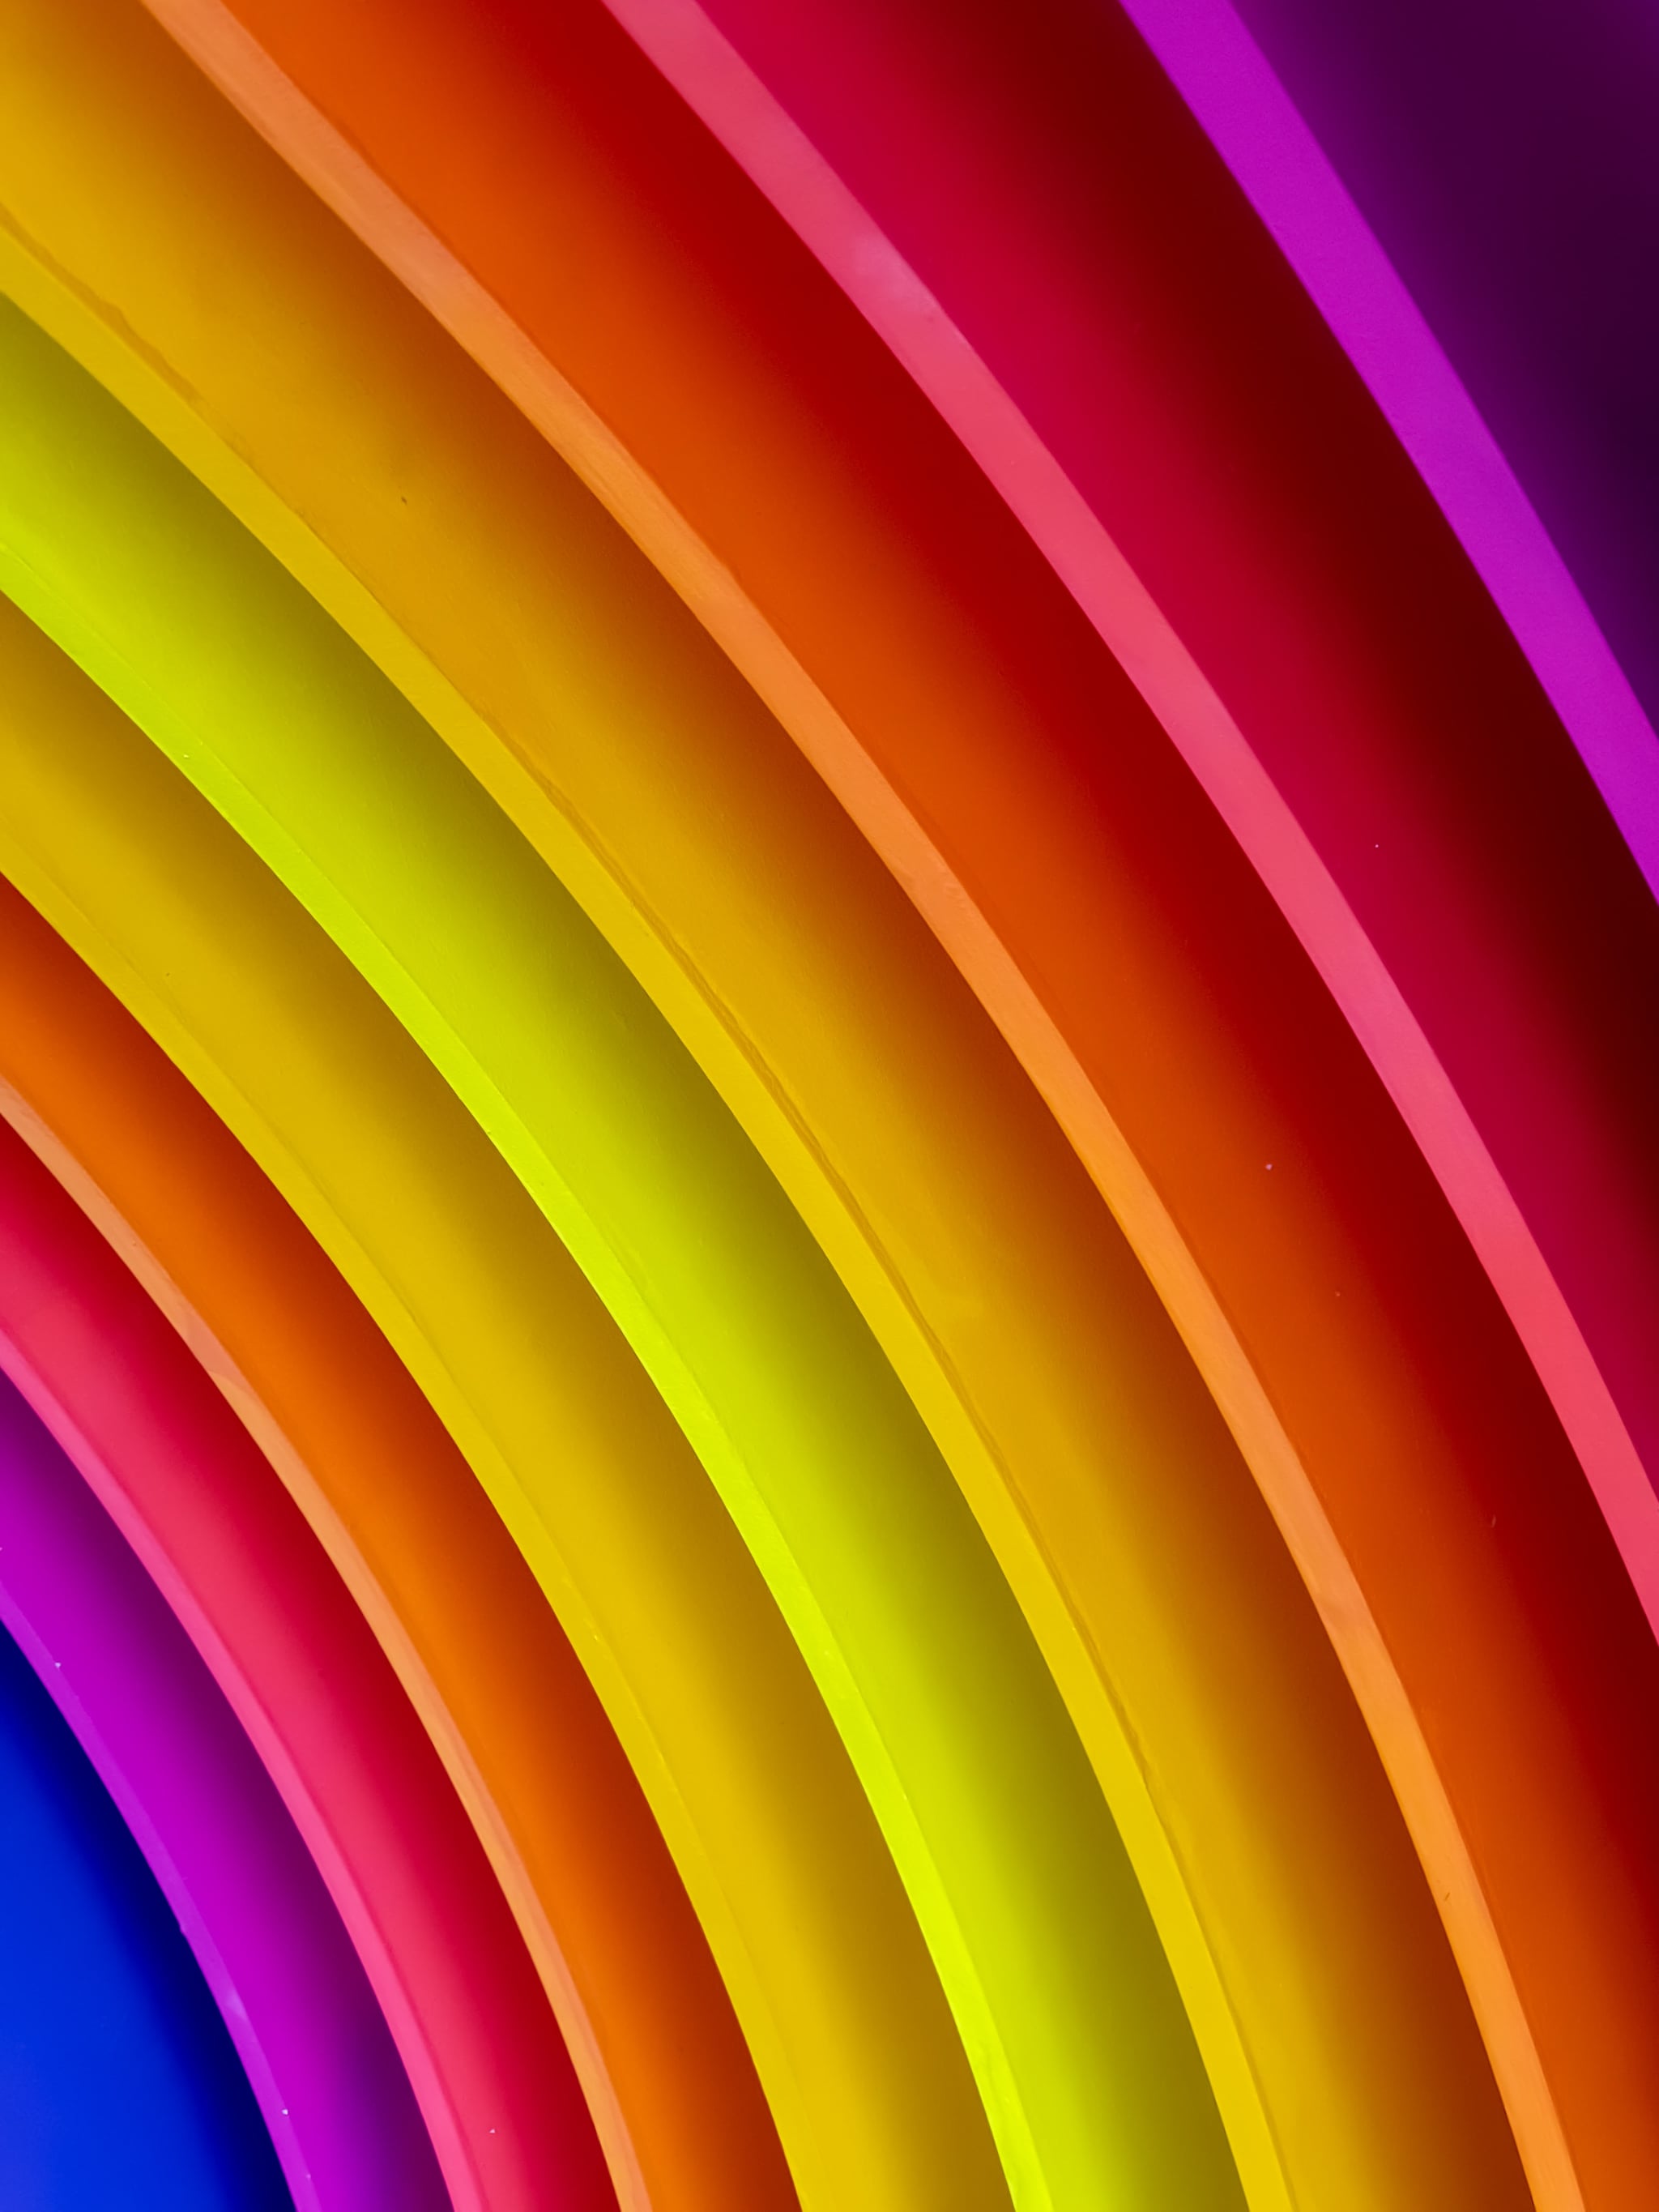 Psychedelic Rainbow Background Lsd Colorful Wallpaper Hình minh họa có sẵn  2043002309  Shutterstock